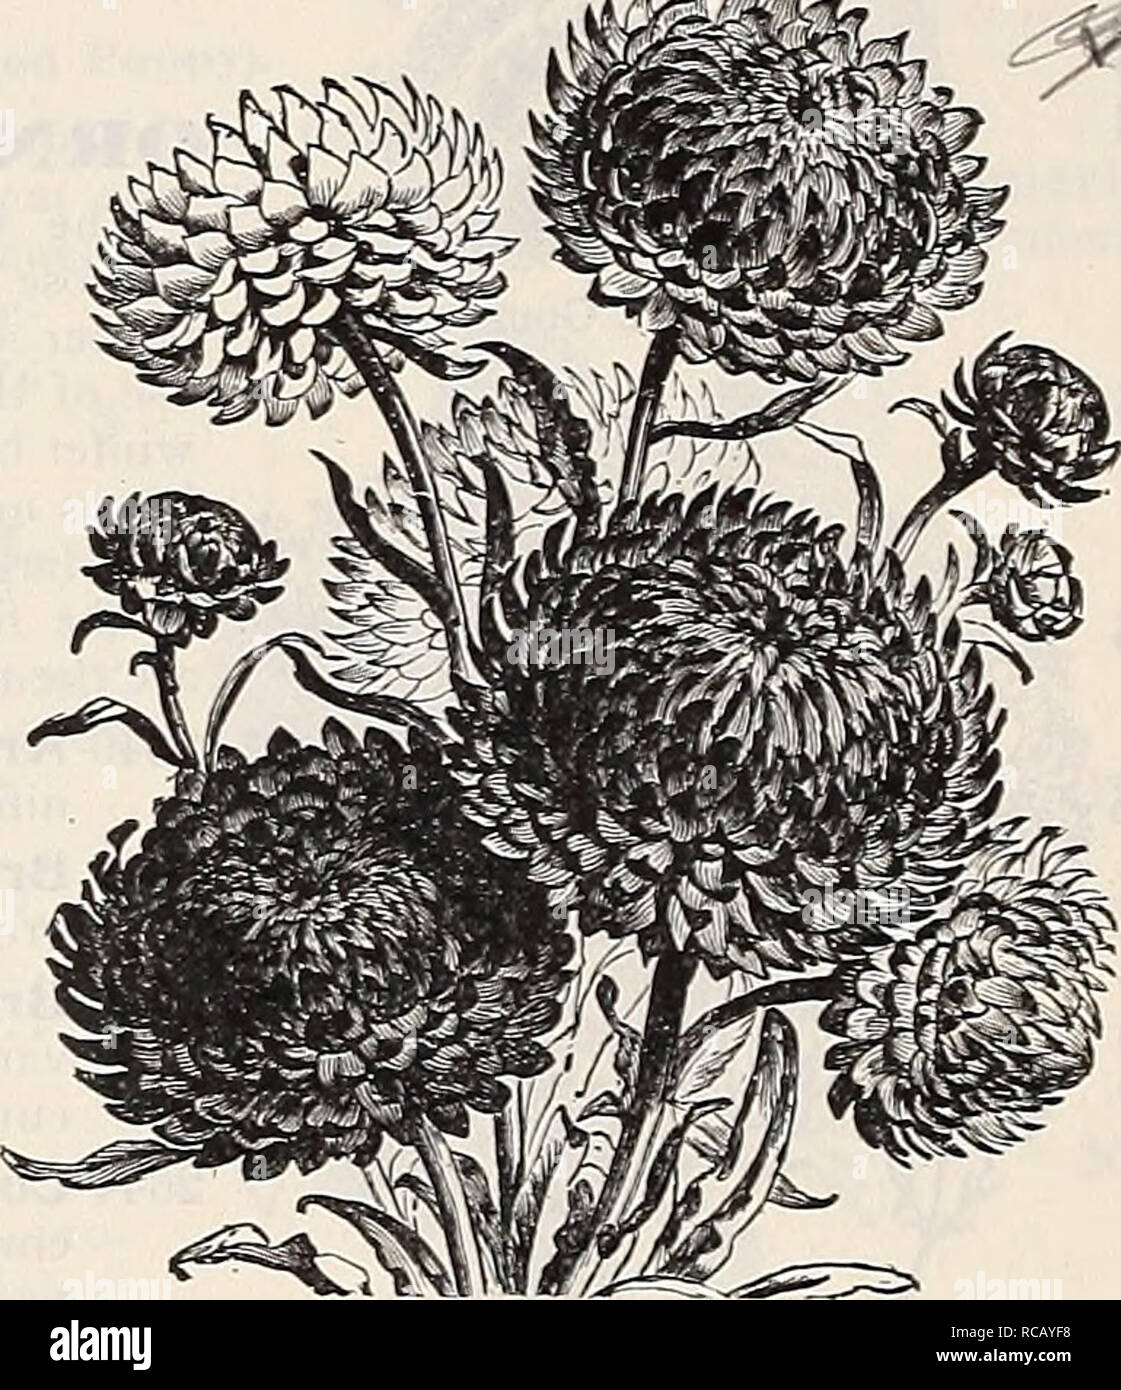 . Dreer's garden book : 1906. Seeds Catalogs; Nursery stock Catalogs; Gardening Equipment and supplies Catalogs; Flowers Seeds Catalogs; Vegetables Seeds Catalogs; Fruit Seeds Catalogs. MiNiATi'RE Sunflower, They all difl&quot;er from the parent, most of them bein  larger, and many with curiously-twisted petals. The prevailing colors are p-.le-yellow, golden-yellow and creamy-white, some with black centres and all beautiful; for cutting they are indispensable. Oz.,60cts 10 2707 — Perkeo. A charming dwarf variety of the Miniature Sun- flower. The plants form com- pact bushes about 12 in. high b Stock Photo